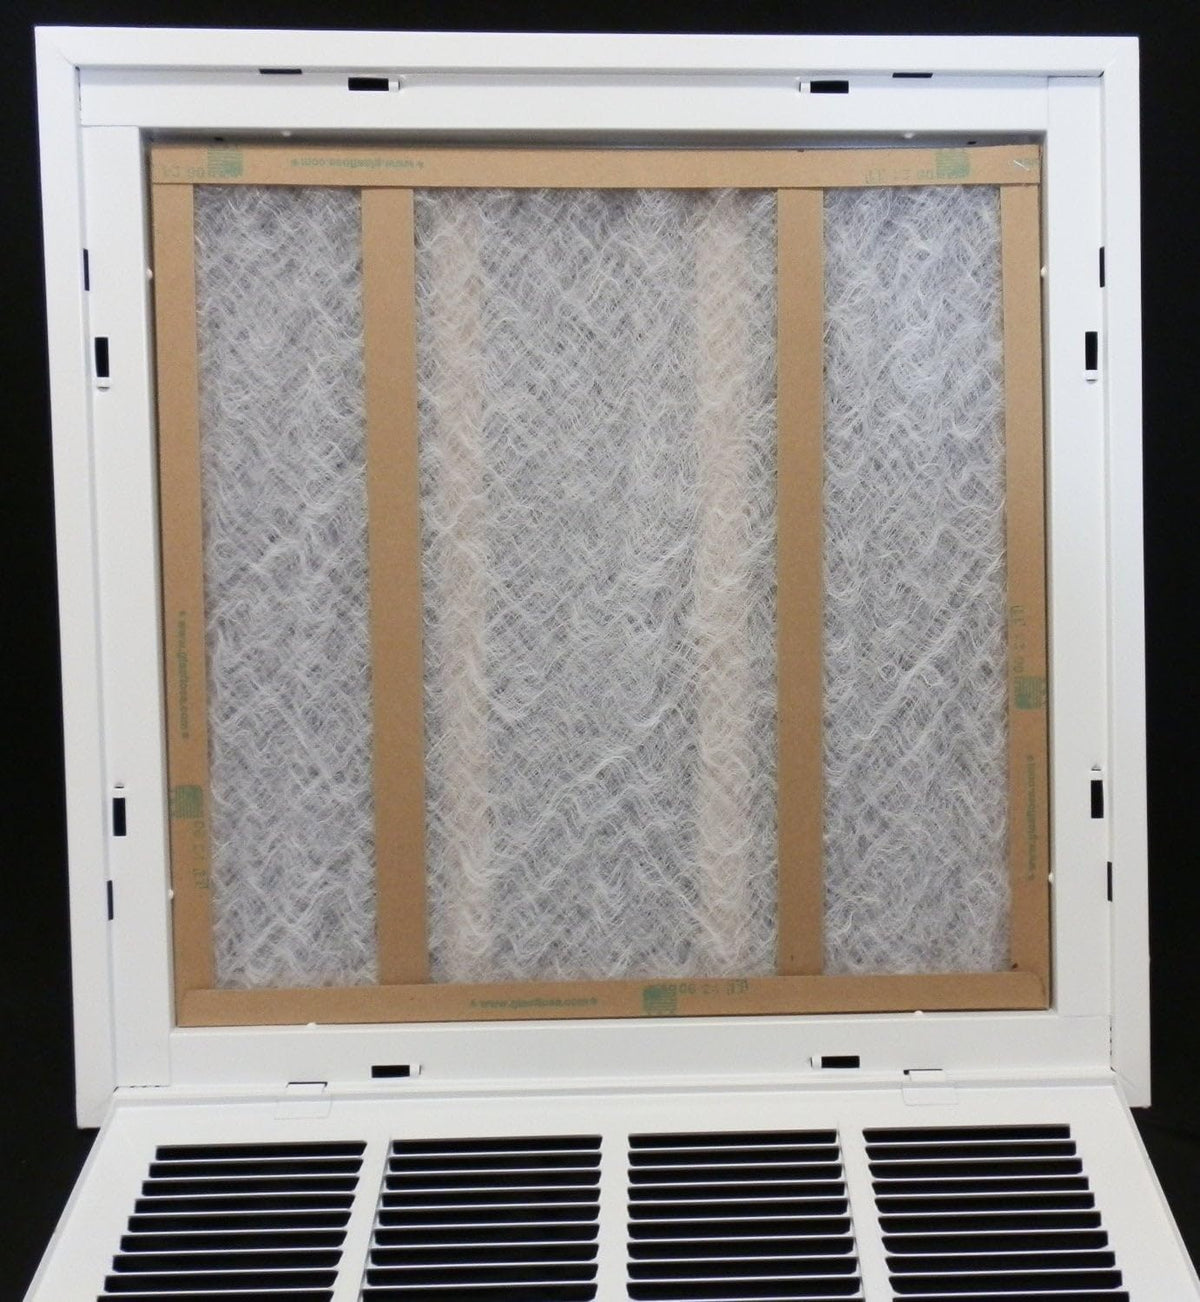 14&quot; X 32&quot; Steel Return Air Filter Grille for 1&quot; Filter - Removable Frame - [Outer Dimensions: 16 5/8&quot; X 34 5/8&quot;]